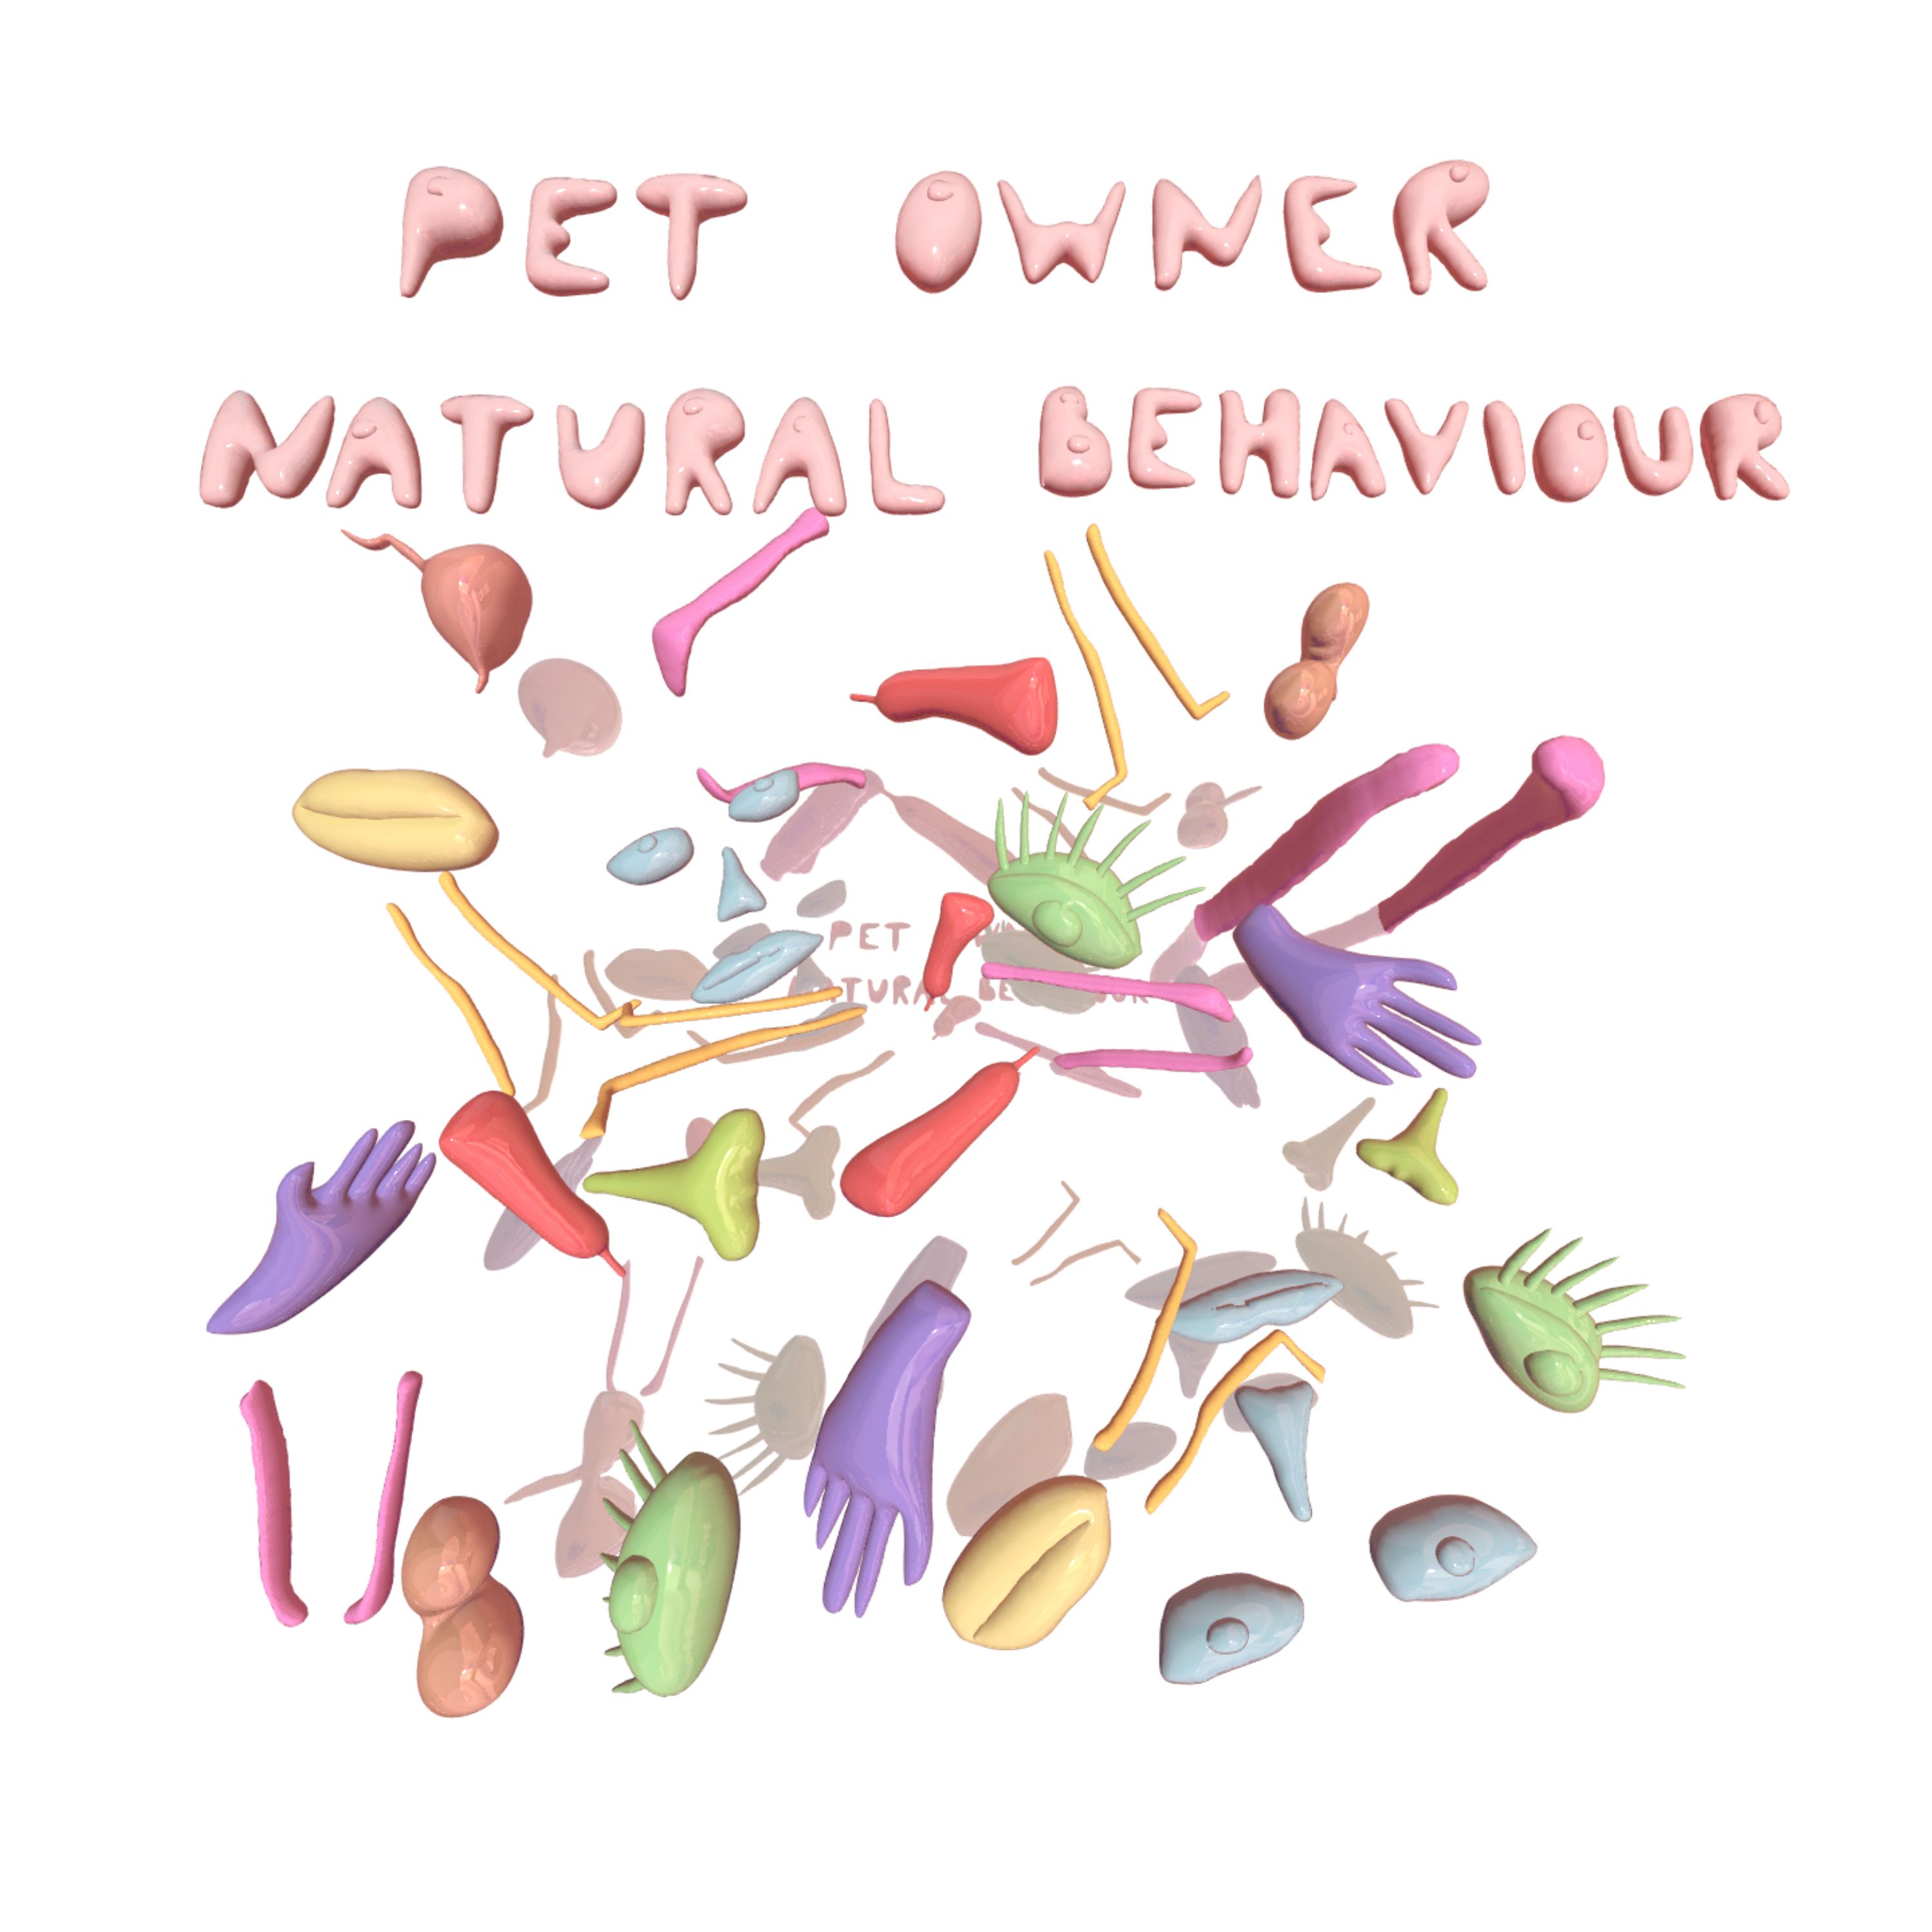 A digital style illustration of various cartoon body parts in different colours with the text Natural Behaviour by Pet Owner